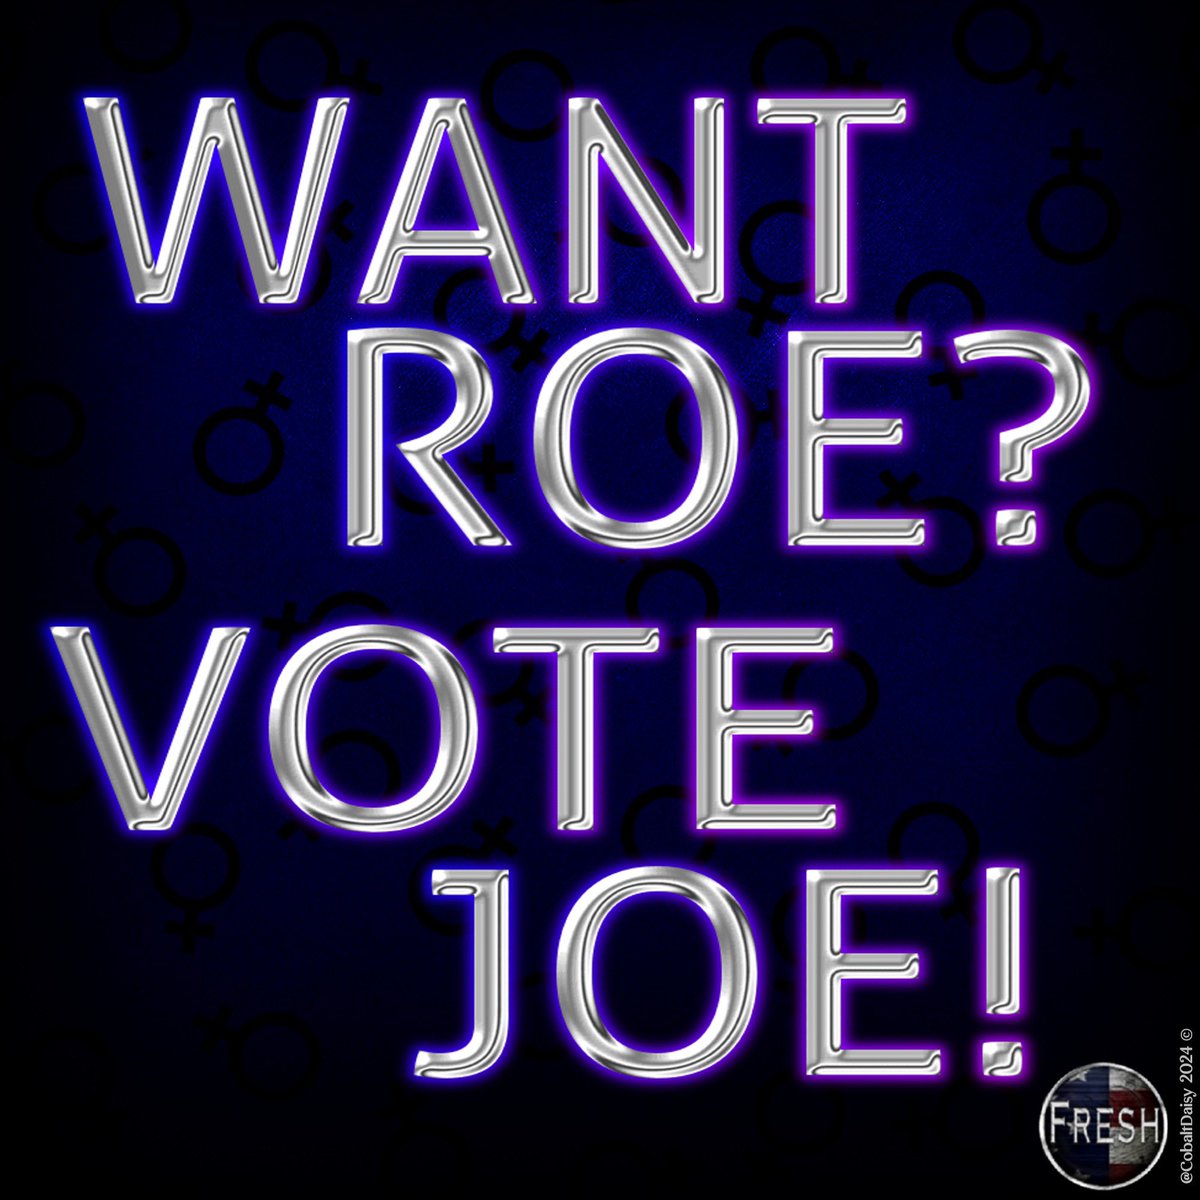 Whats his name will sign a national abortion ban. 

President Joseph R. Biden will sign a law to Codify Roe and protect women’s rights to make choices about their own bodies. 

It is choosing time in America! #WantRoeVoteJoe 🇺🇸

#FreshVoicesRise